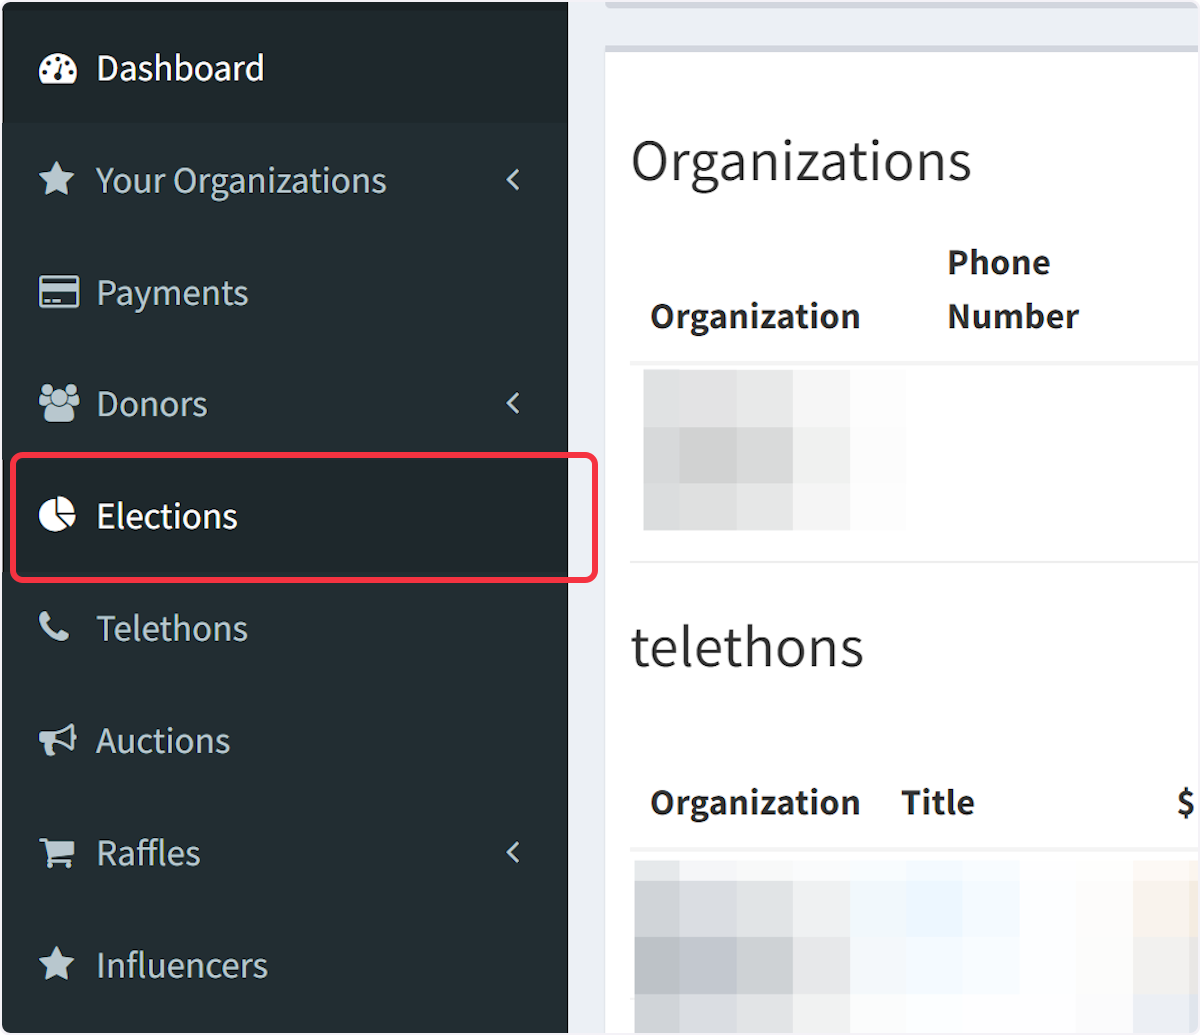 Click "Elections" in the main menu.